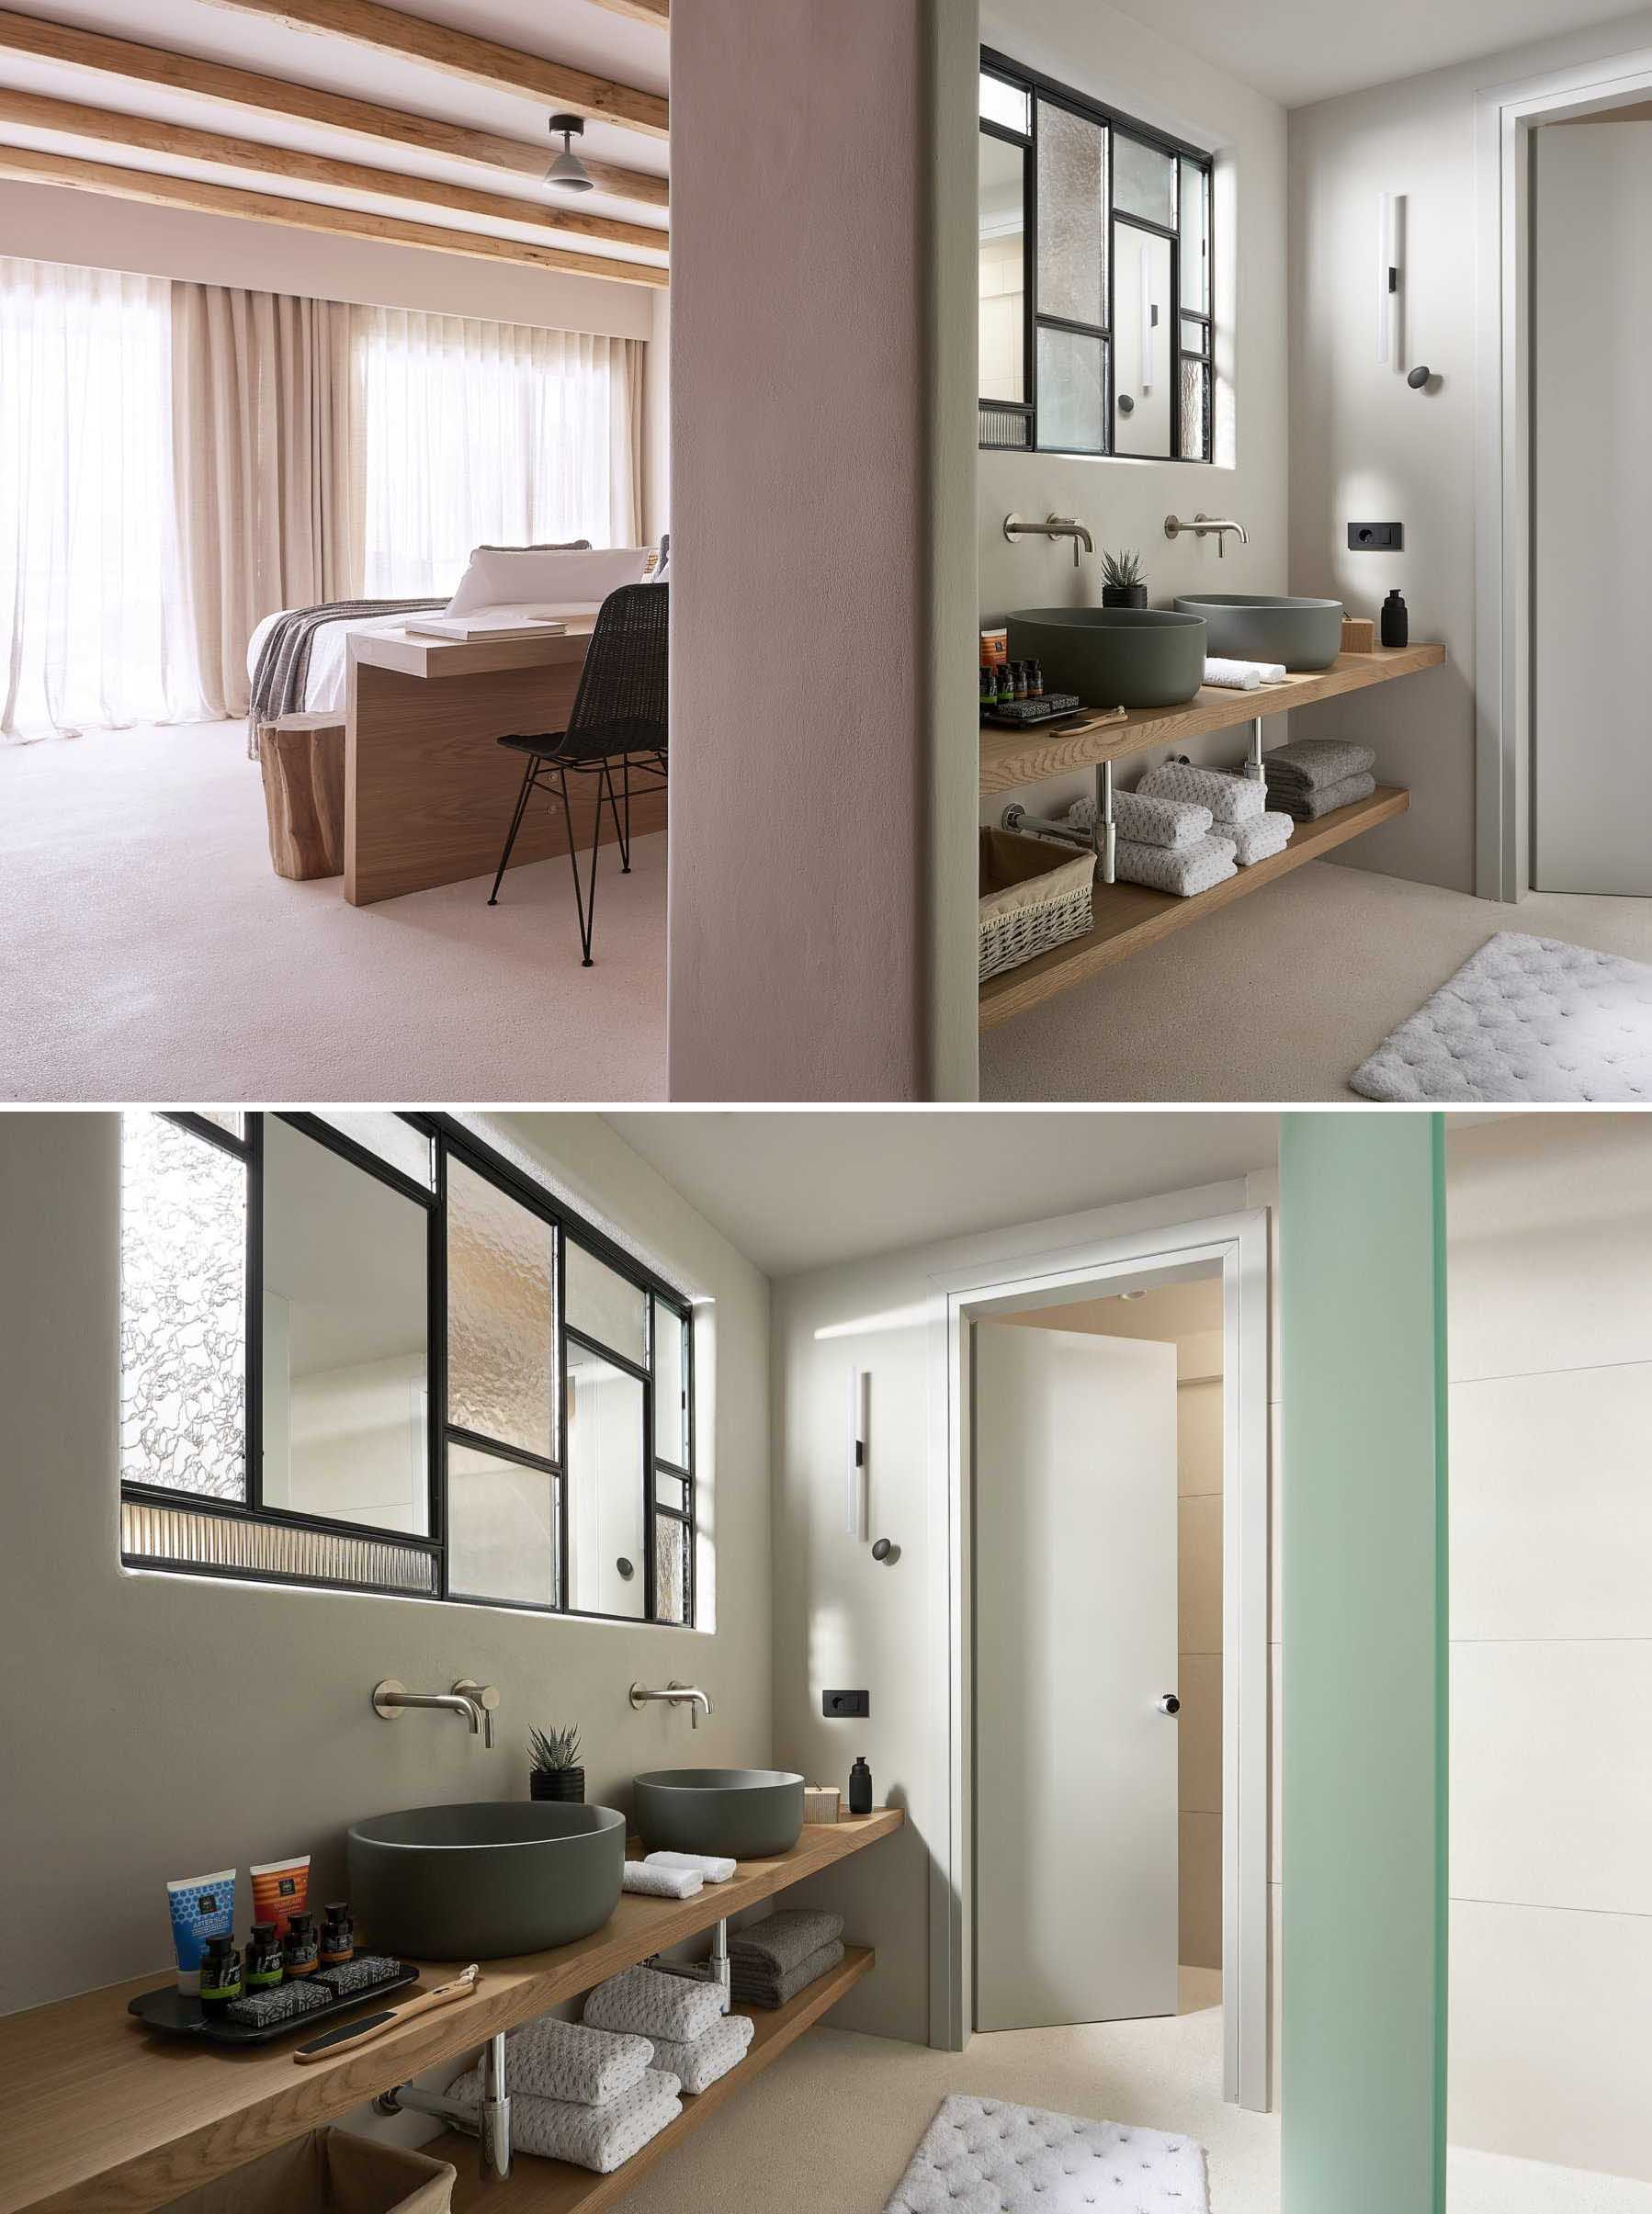 This modern hotel room has an interior window, with mirrors included as part of the window frame, that allows natural light to flow throughout the space, while the wood vanity complements the bed headboard and desk.